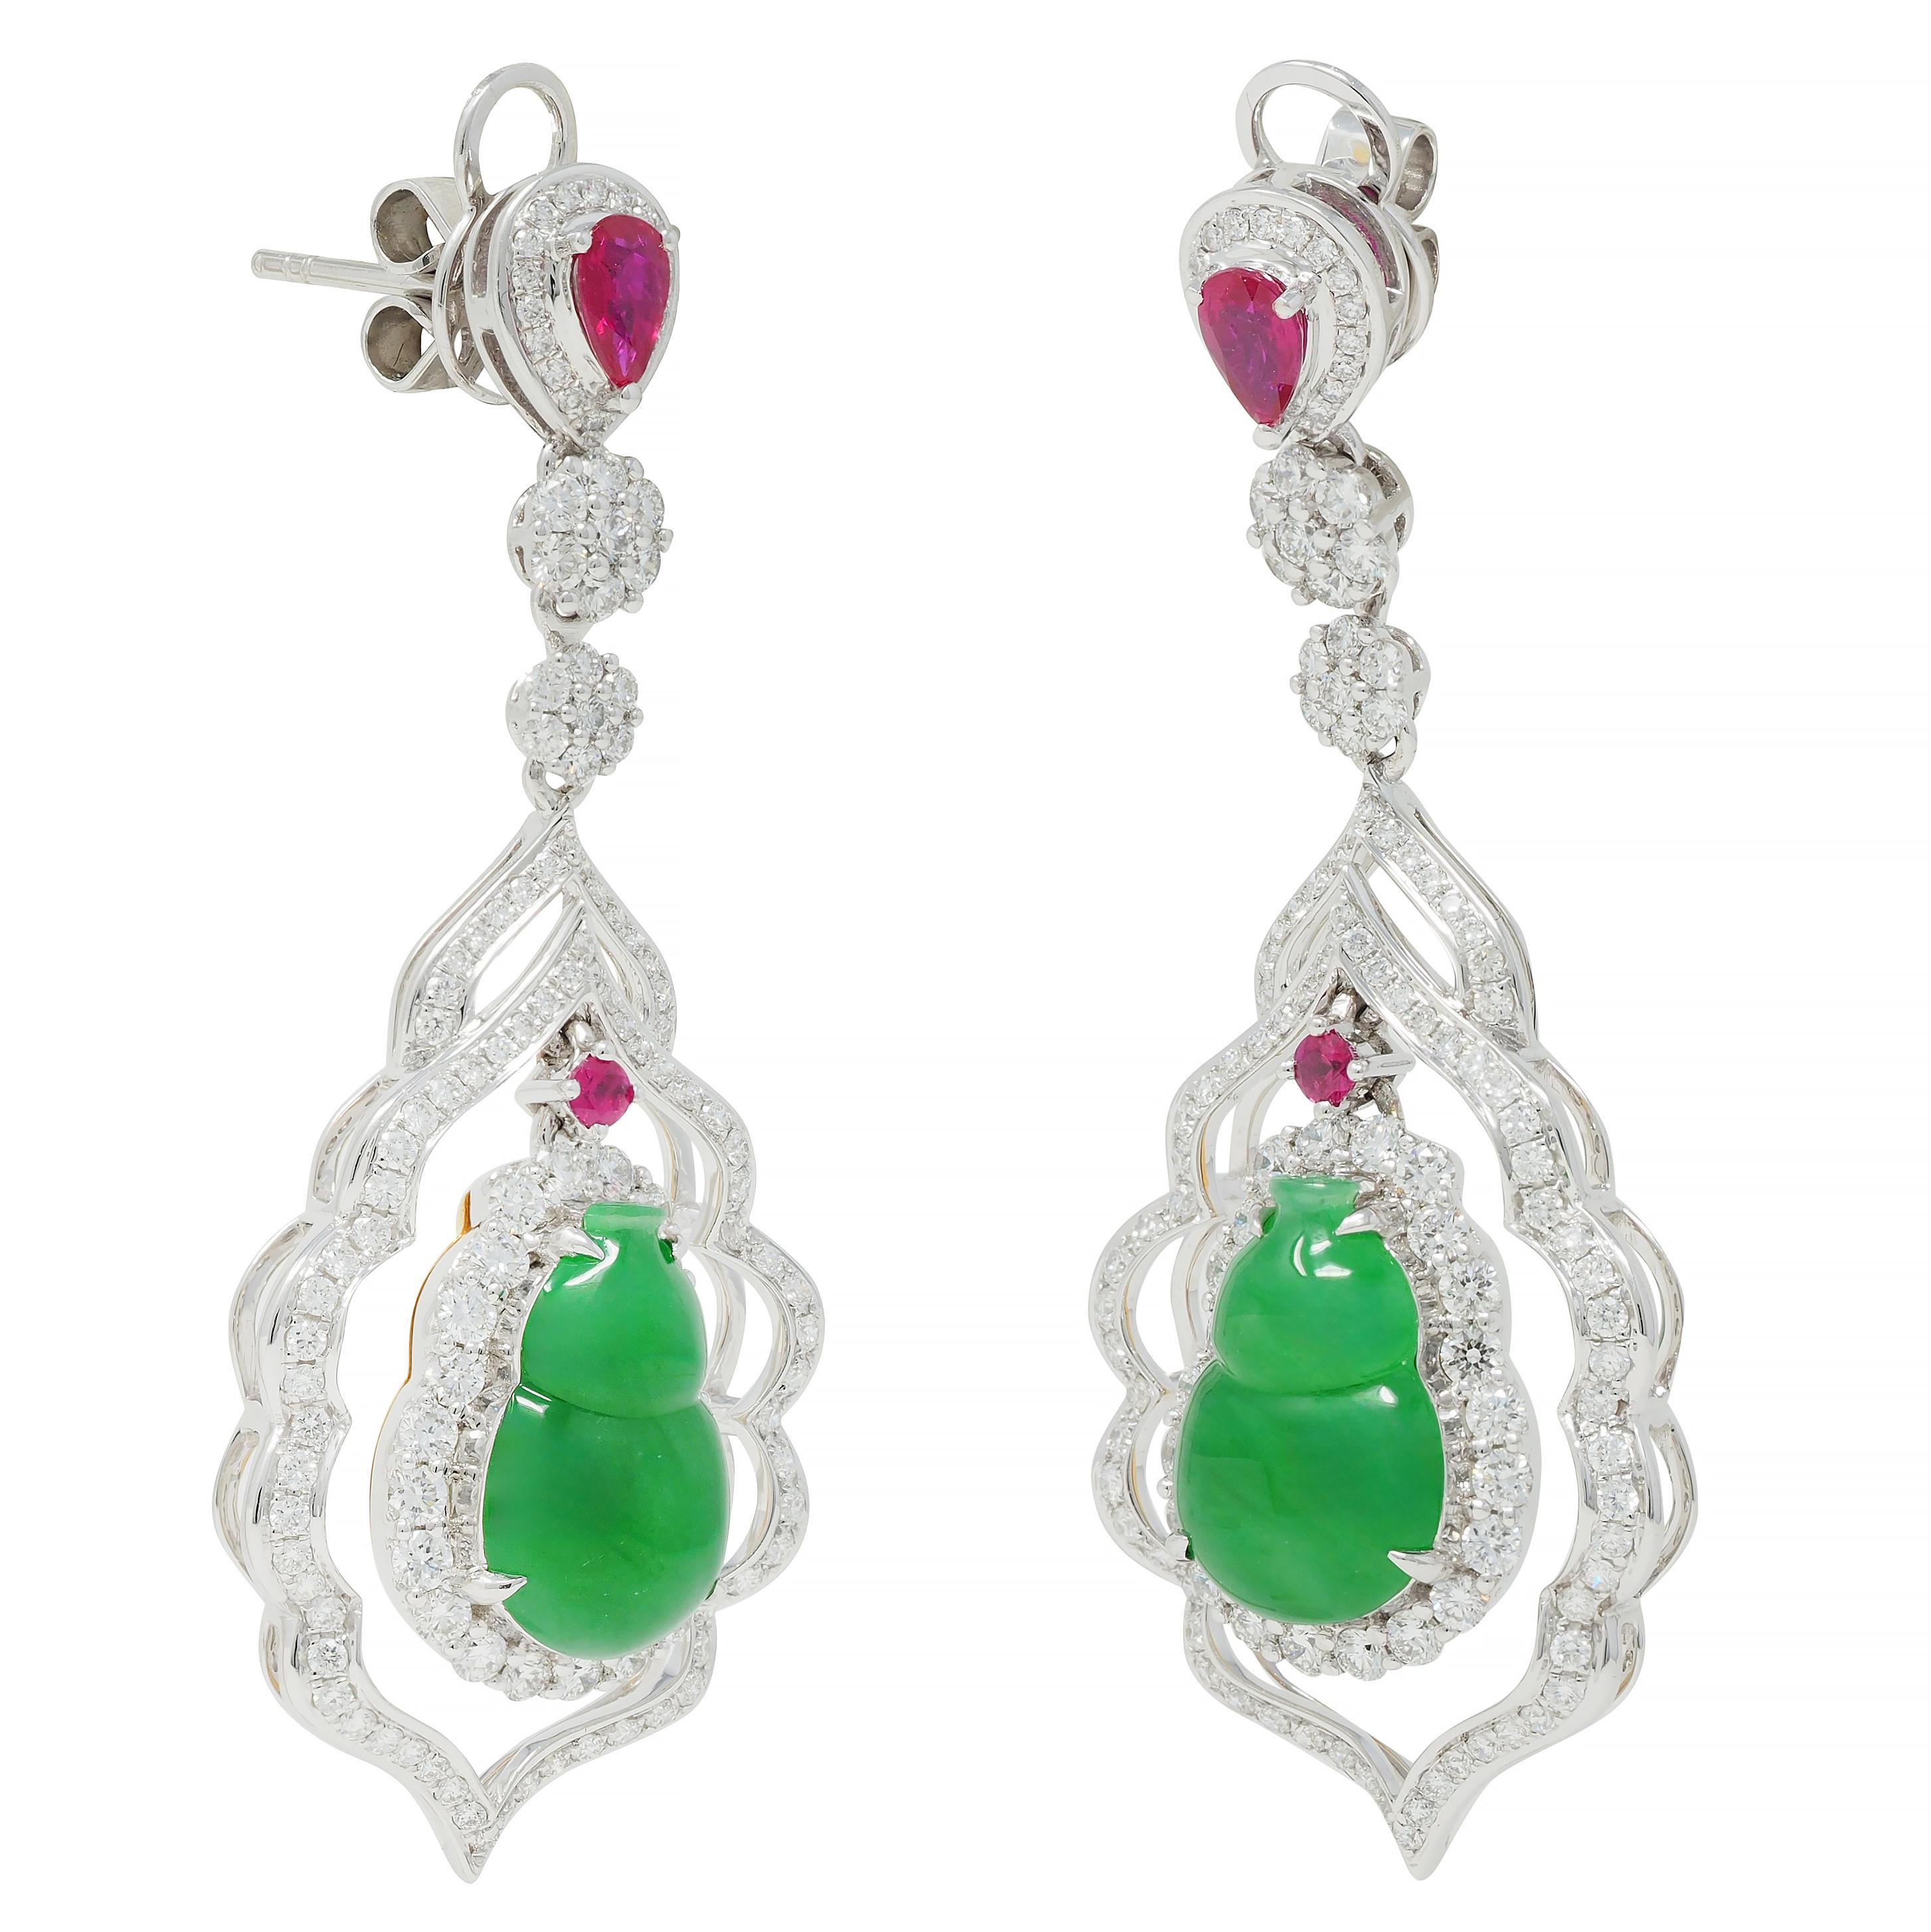 Designed as pear-shaped surmounts suspending floral clusters and undulating biomorphic navette form drops 
Featuring carved jade plaques depicting gourds - measuring 8.5 x 13.0 mm 
Translucent medium vibrant green in color - backed by yellow gold